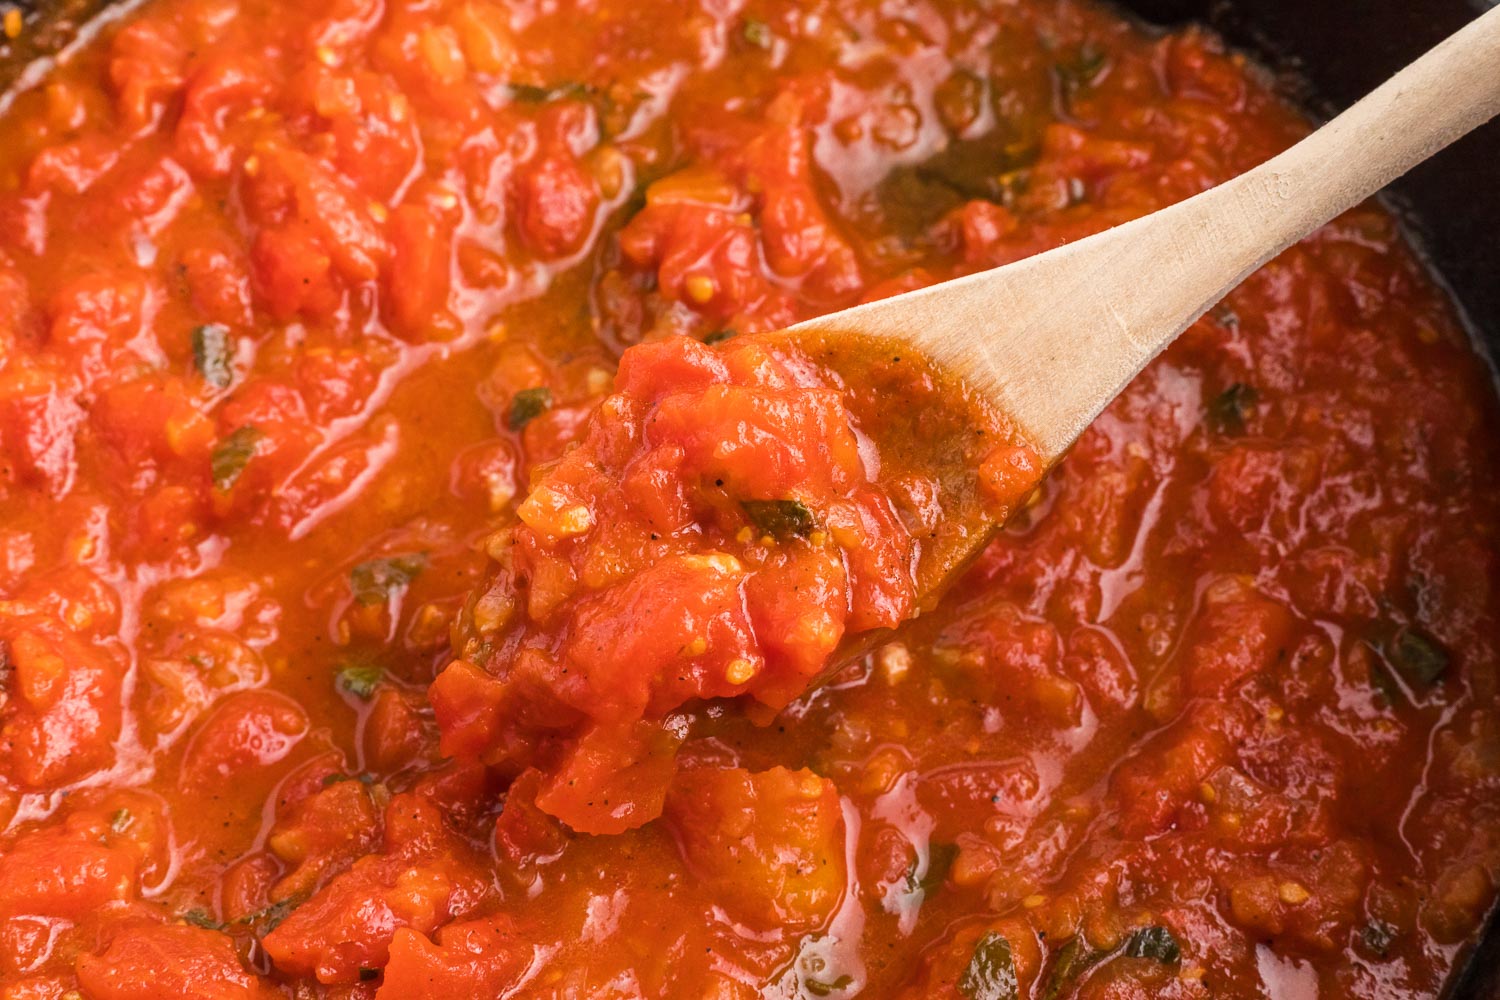 A homemade tomato sauce with a wooden spoon pulling up the sauce.